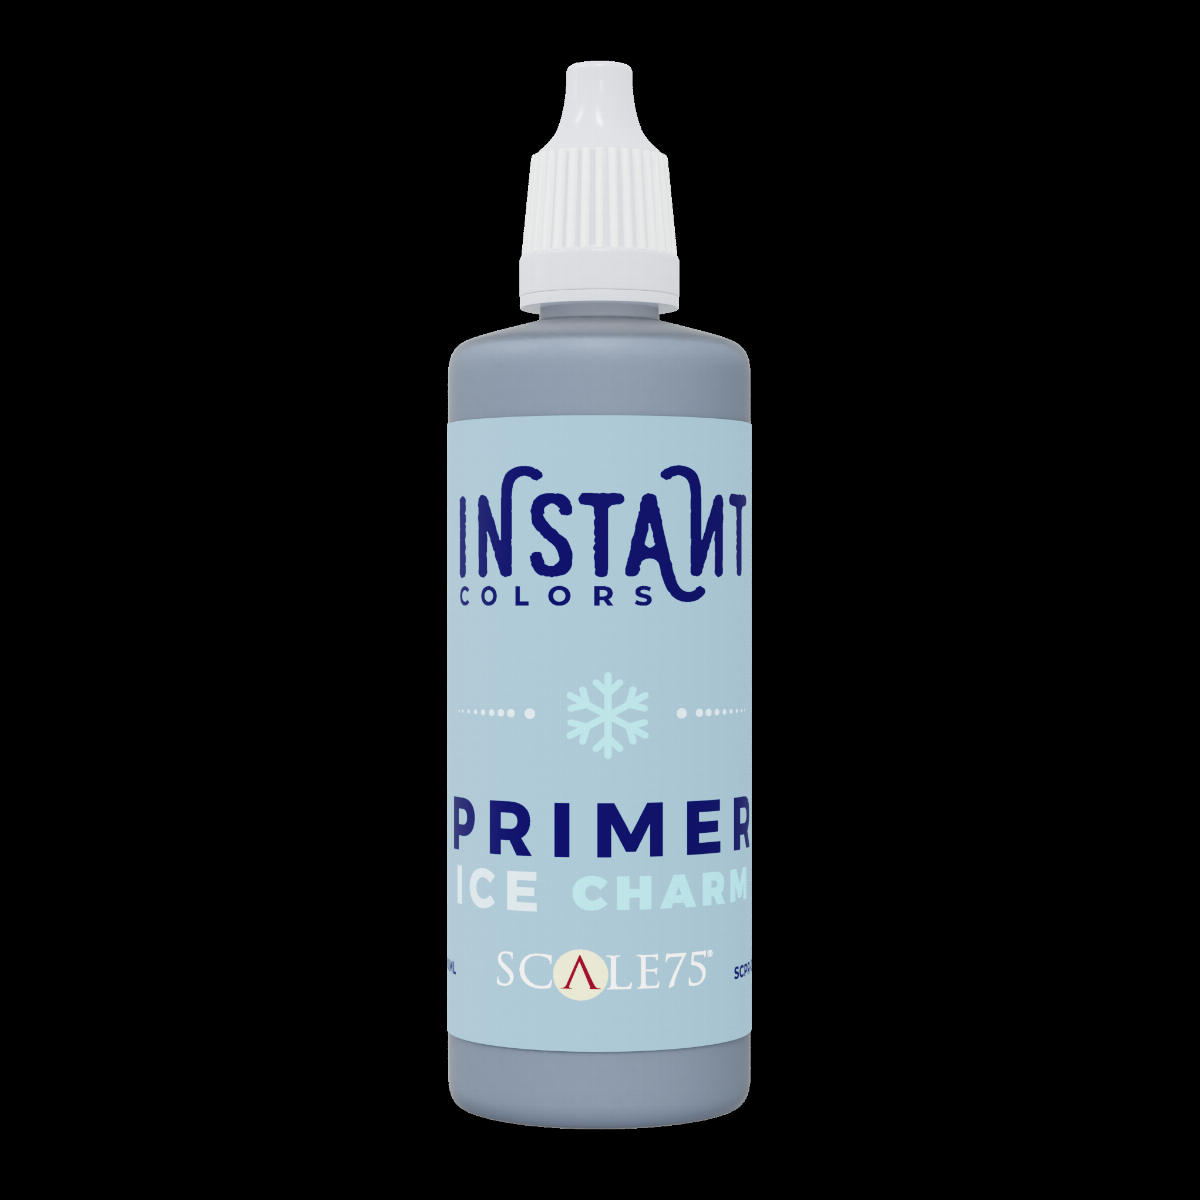 Scale75 Scale 75: Instant Colors Primer - Ice Charm